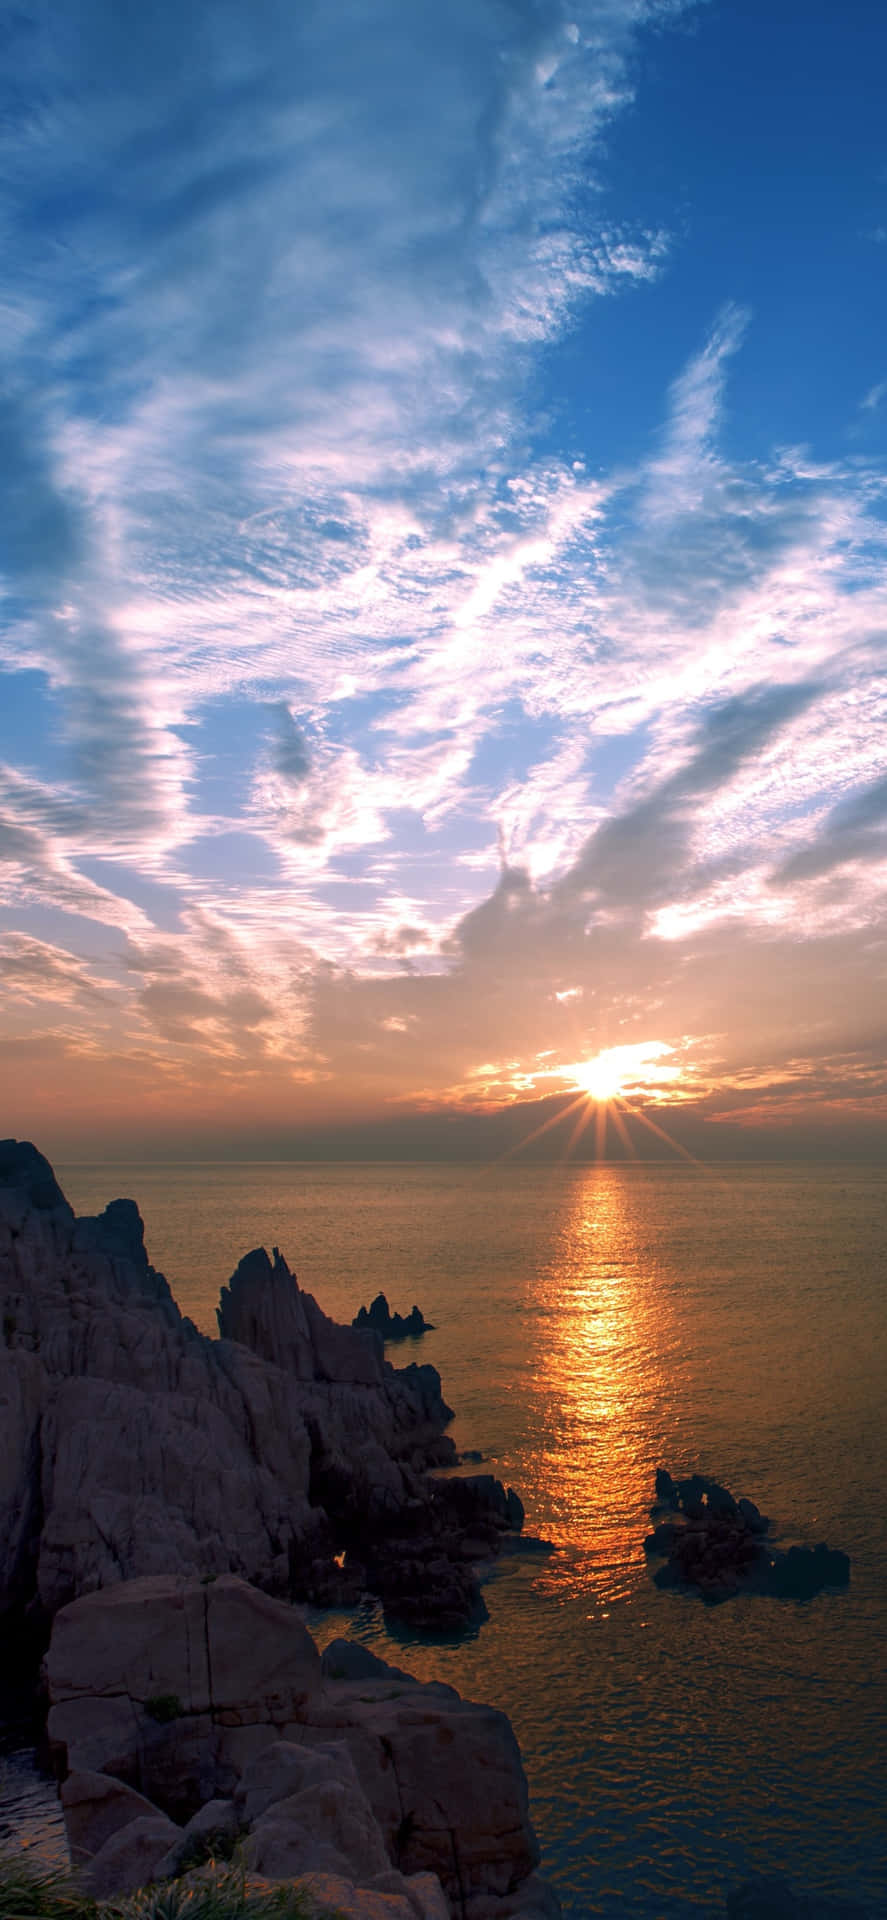 Take in the beauty of the rising sun with your iphone Wallpaper